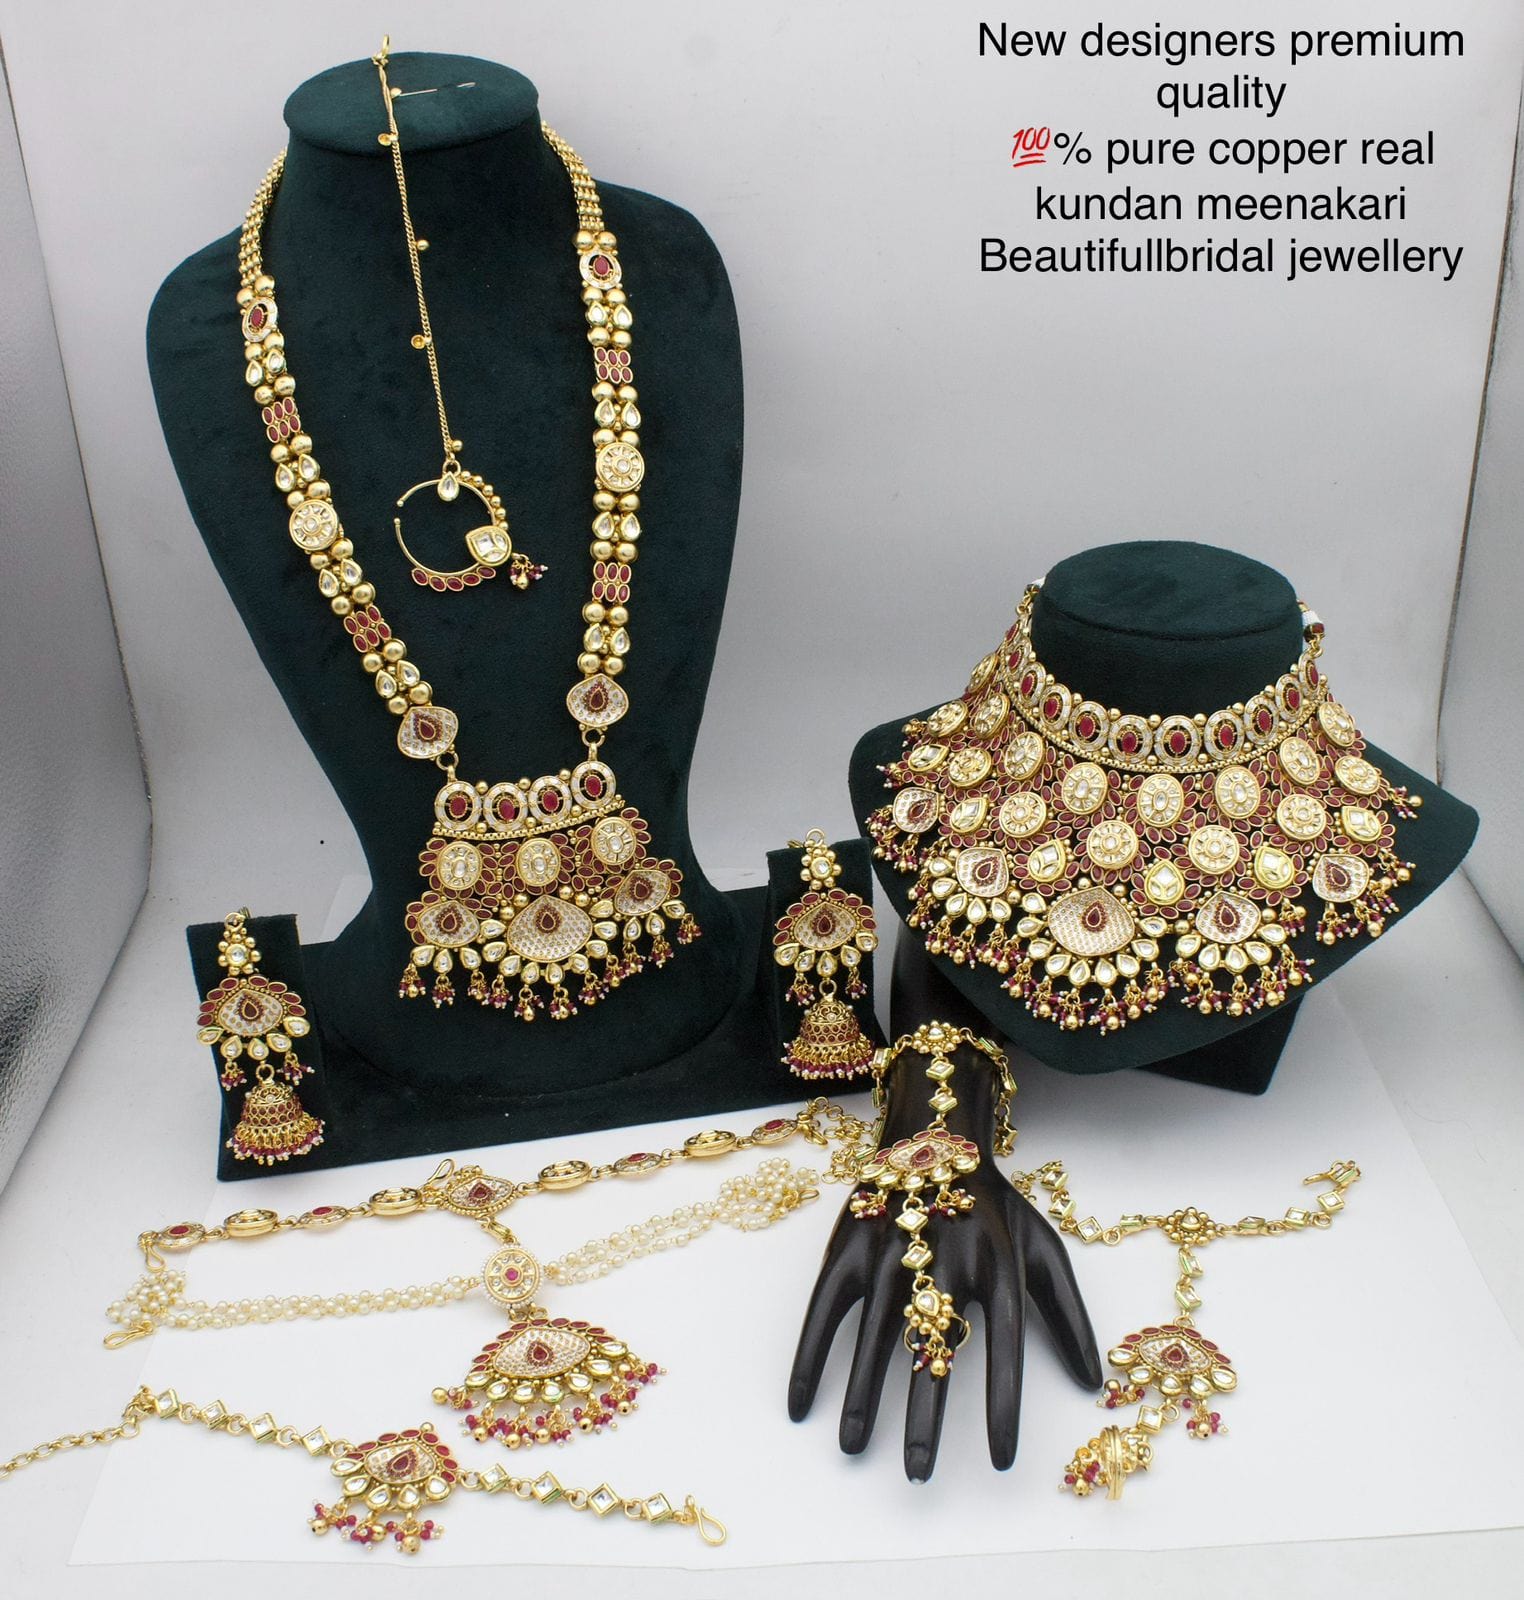 LV Bridal jewelry Exquisite Red Copper Bridal Jewelry Set with Elegant Accessories